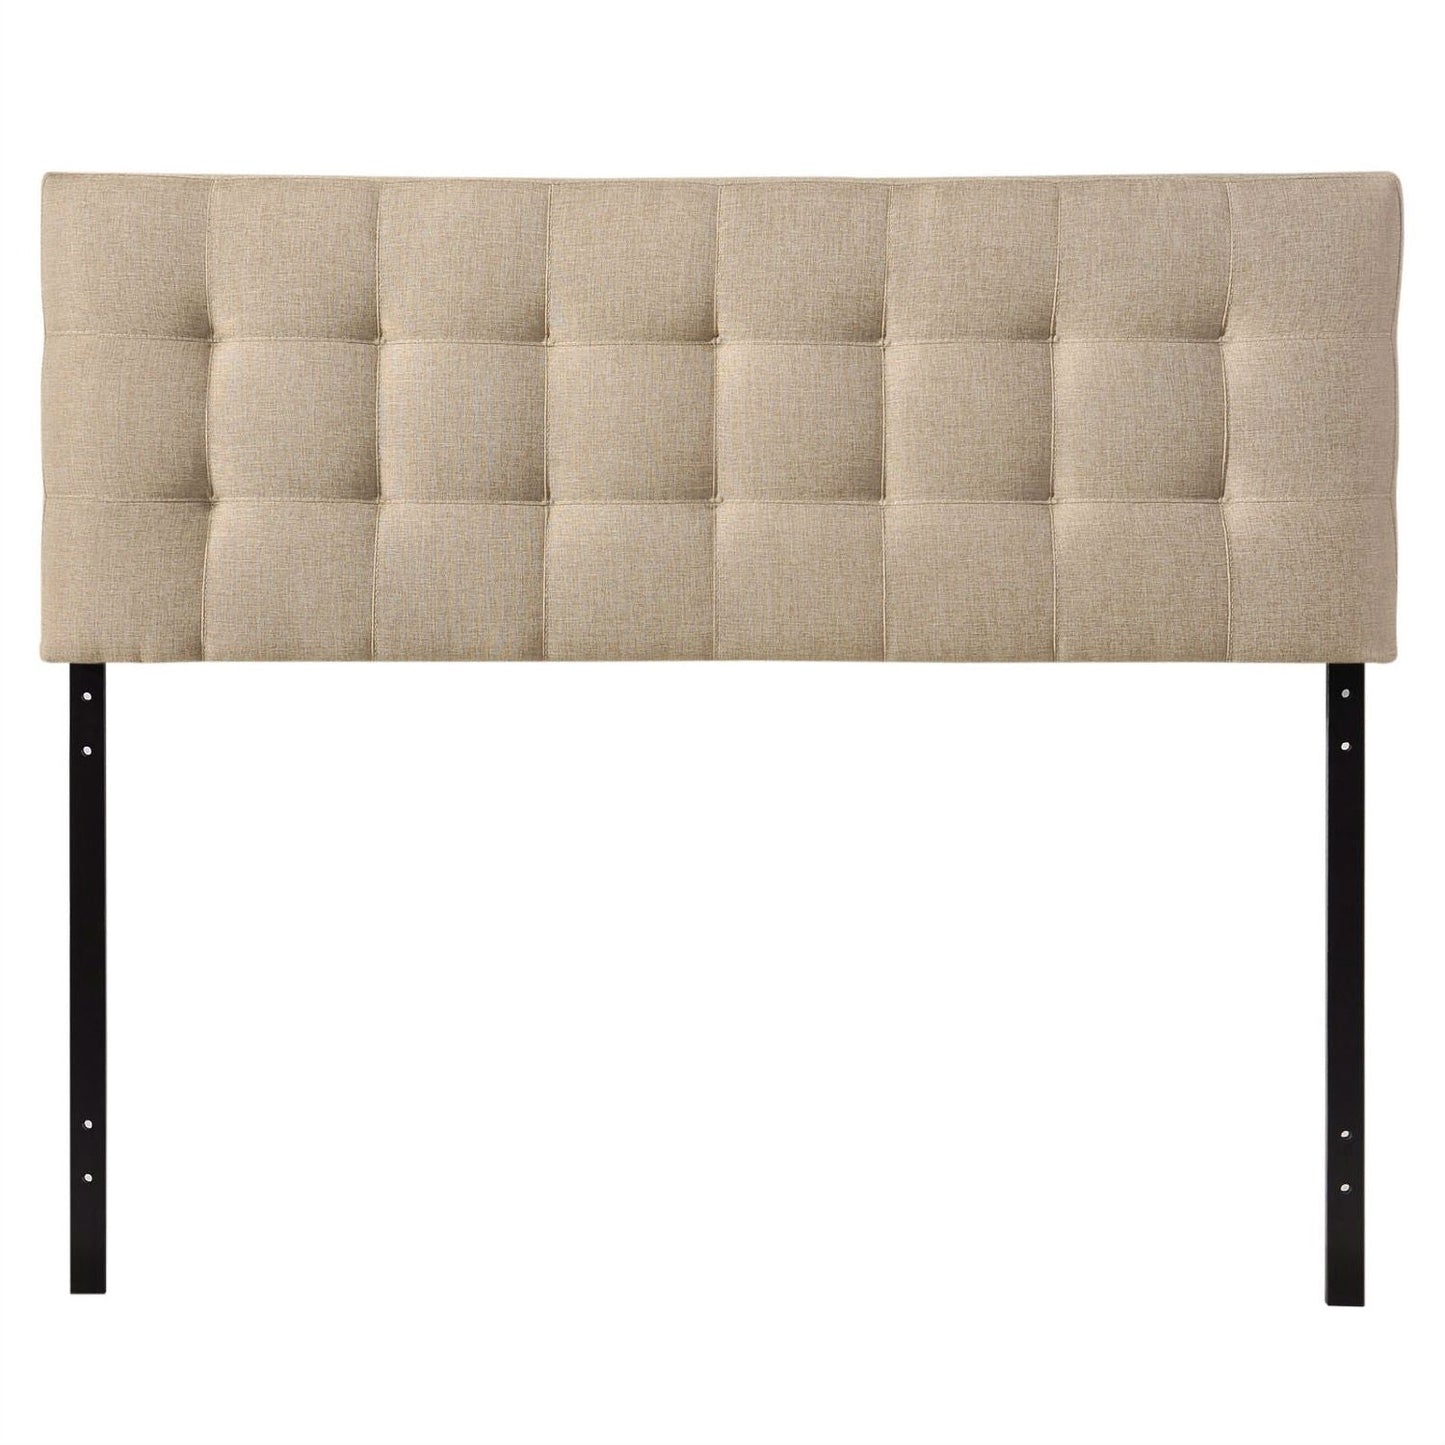 Bedroom > Headboards - King Size Beige Fabric Upholstered Headboard With Modern Tufting